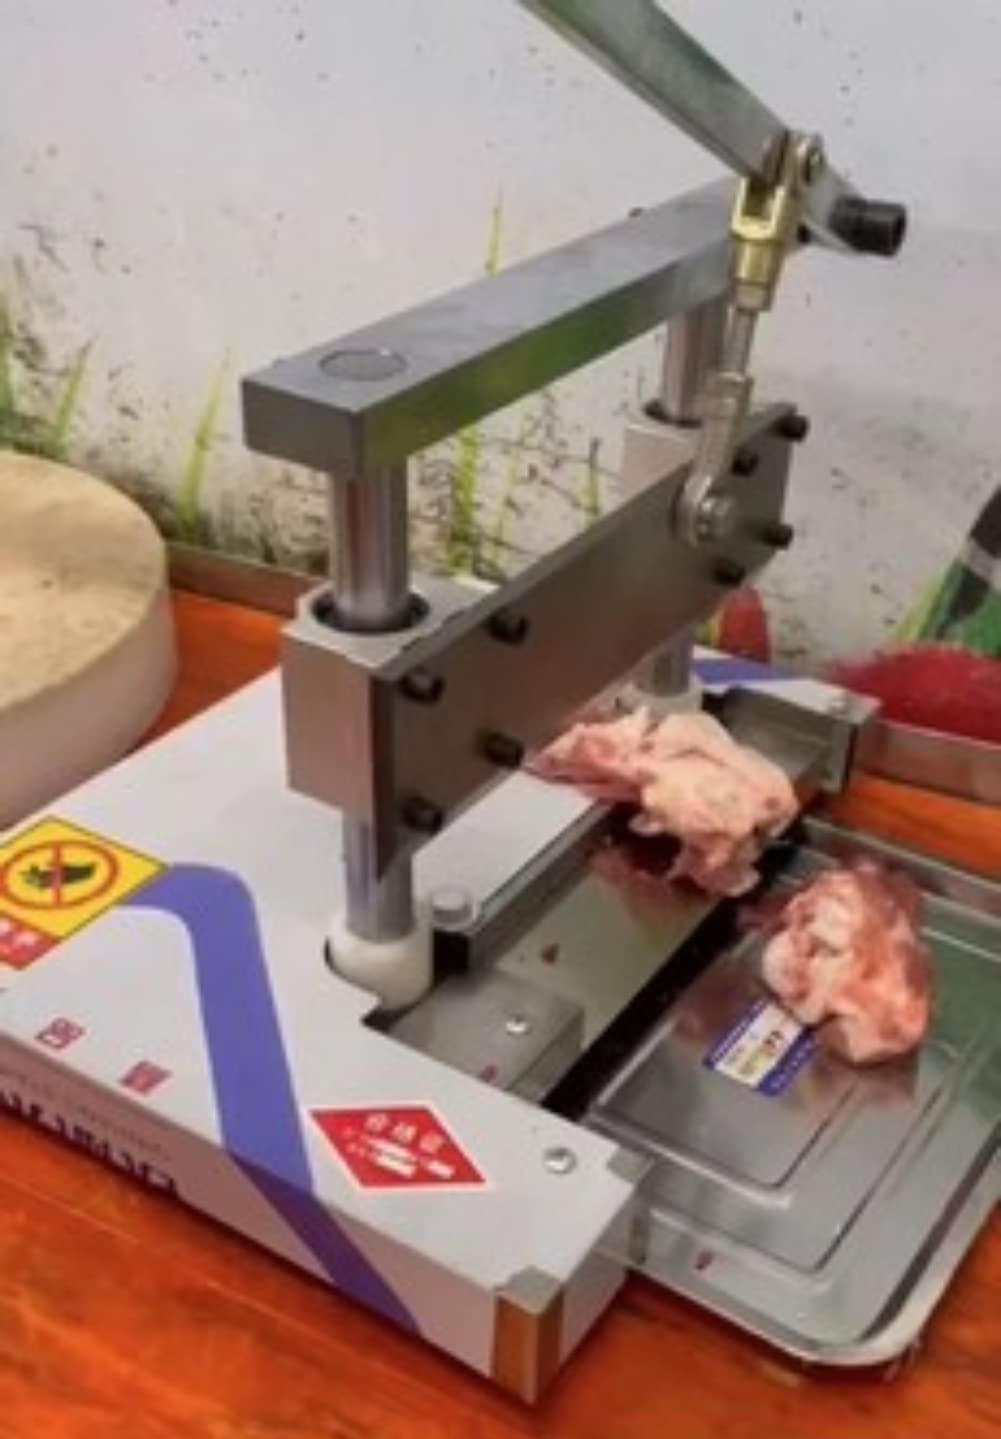 Commercial Stainless Steel Countertop Manual Type Meat Cutting Machine Frozen Meat Bone Sawing Machine 190MM